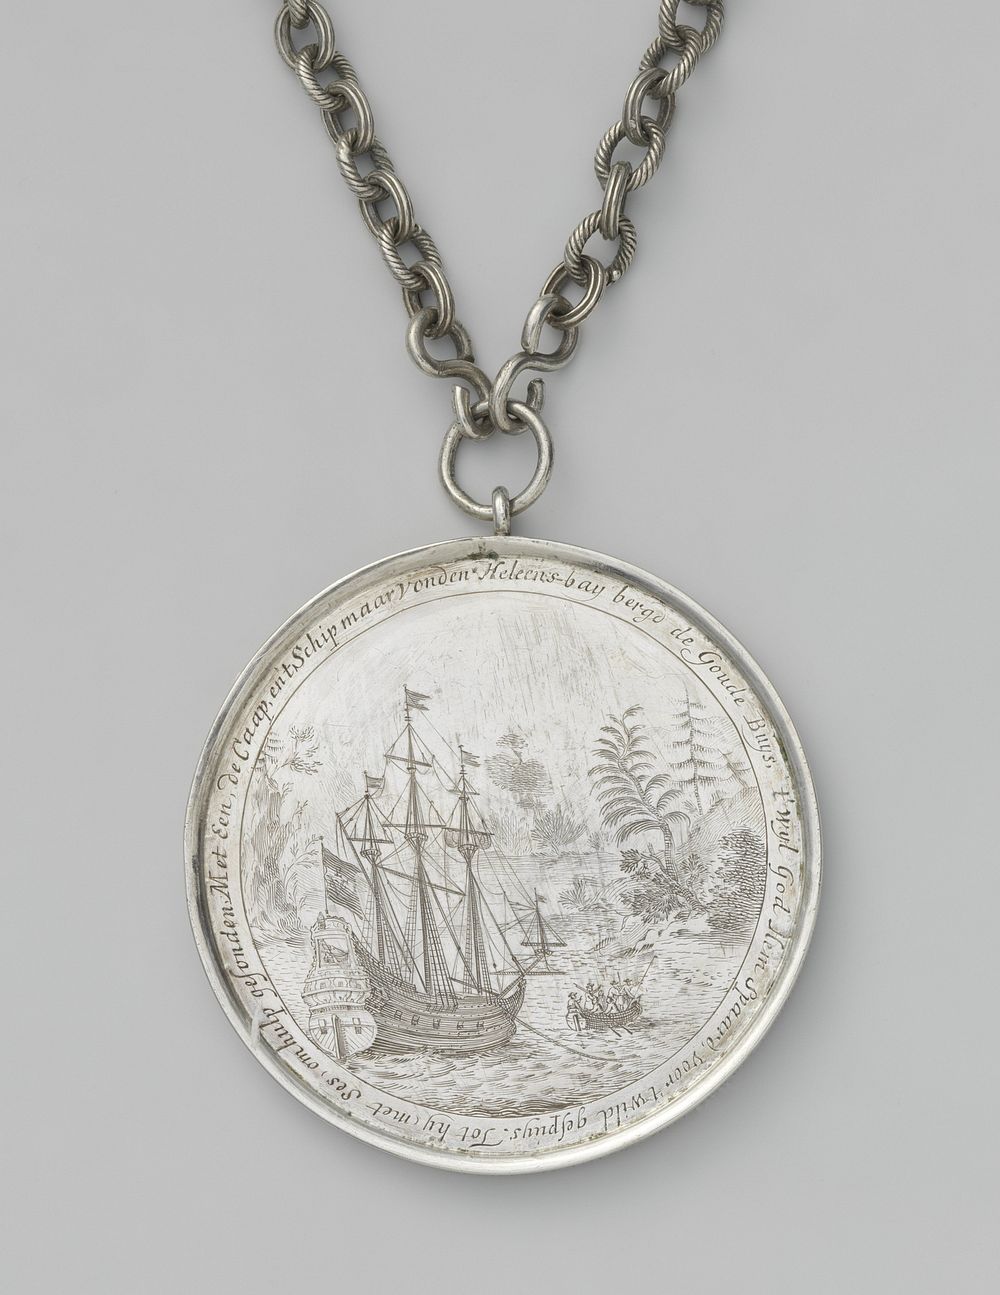 Medal for Lourens Veijselaar, survivor of the disaster with the Gouden Buys (1695) by anonymous, VOC Kamer Enkhuizen and…